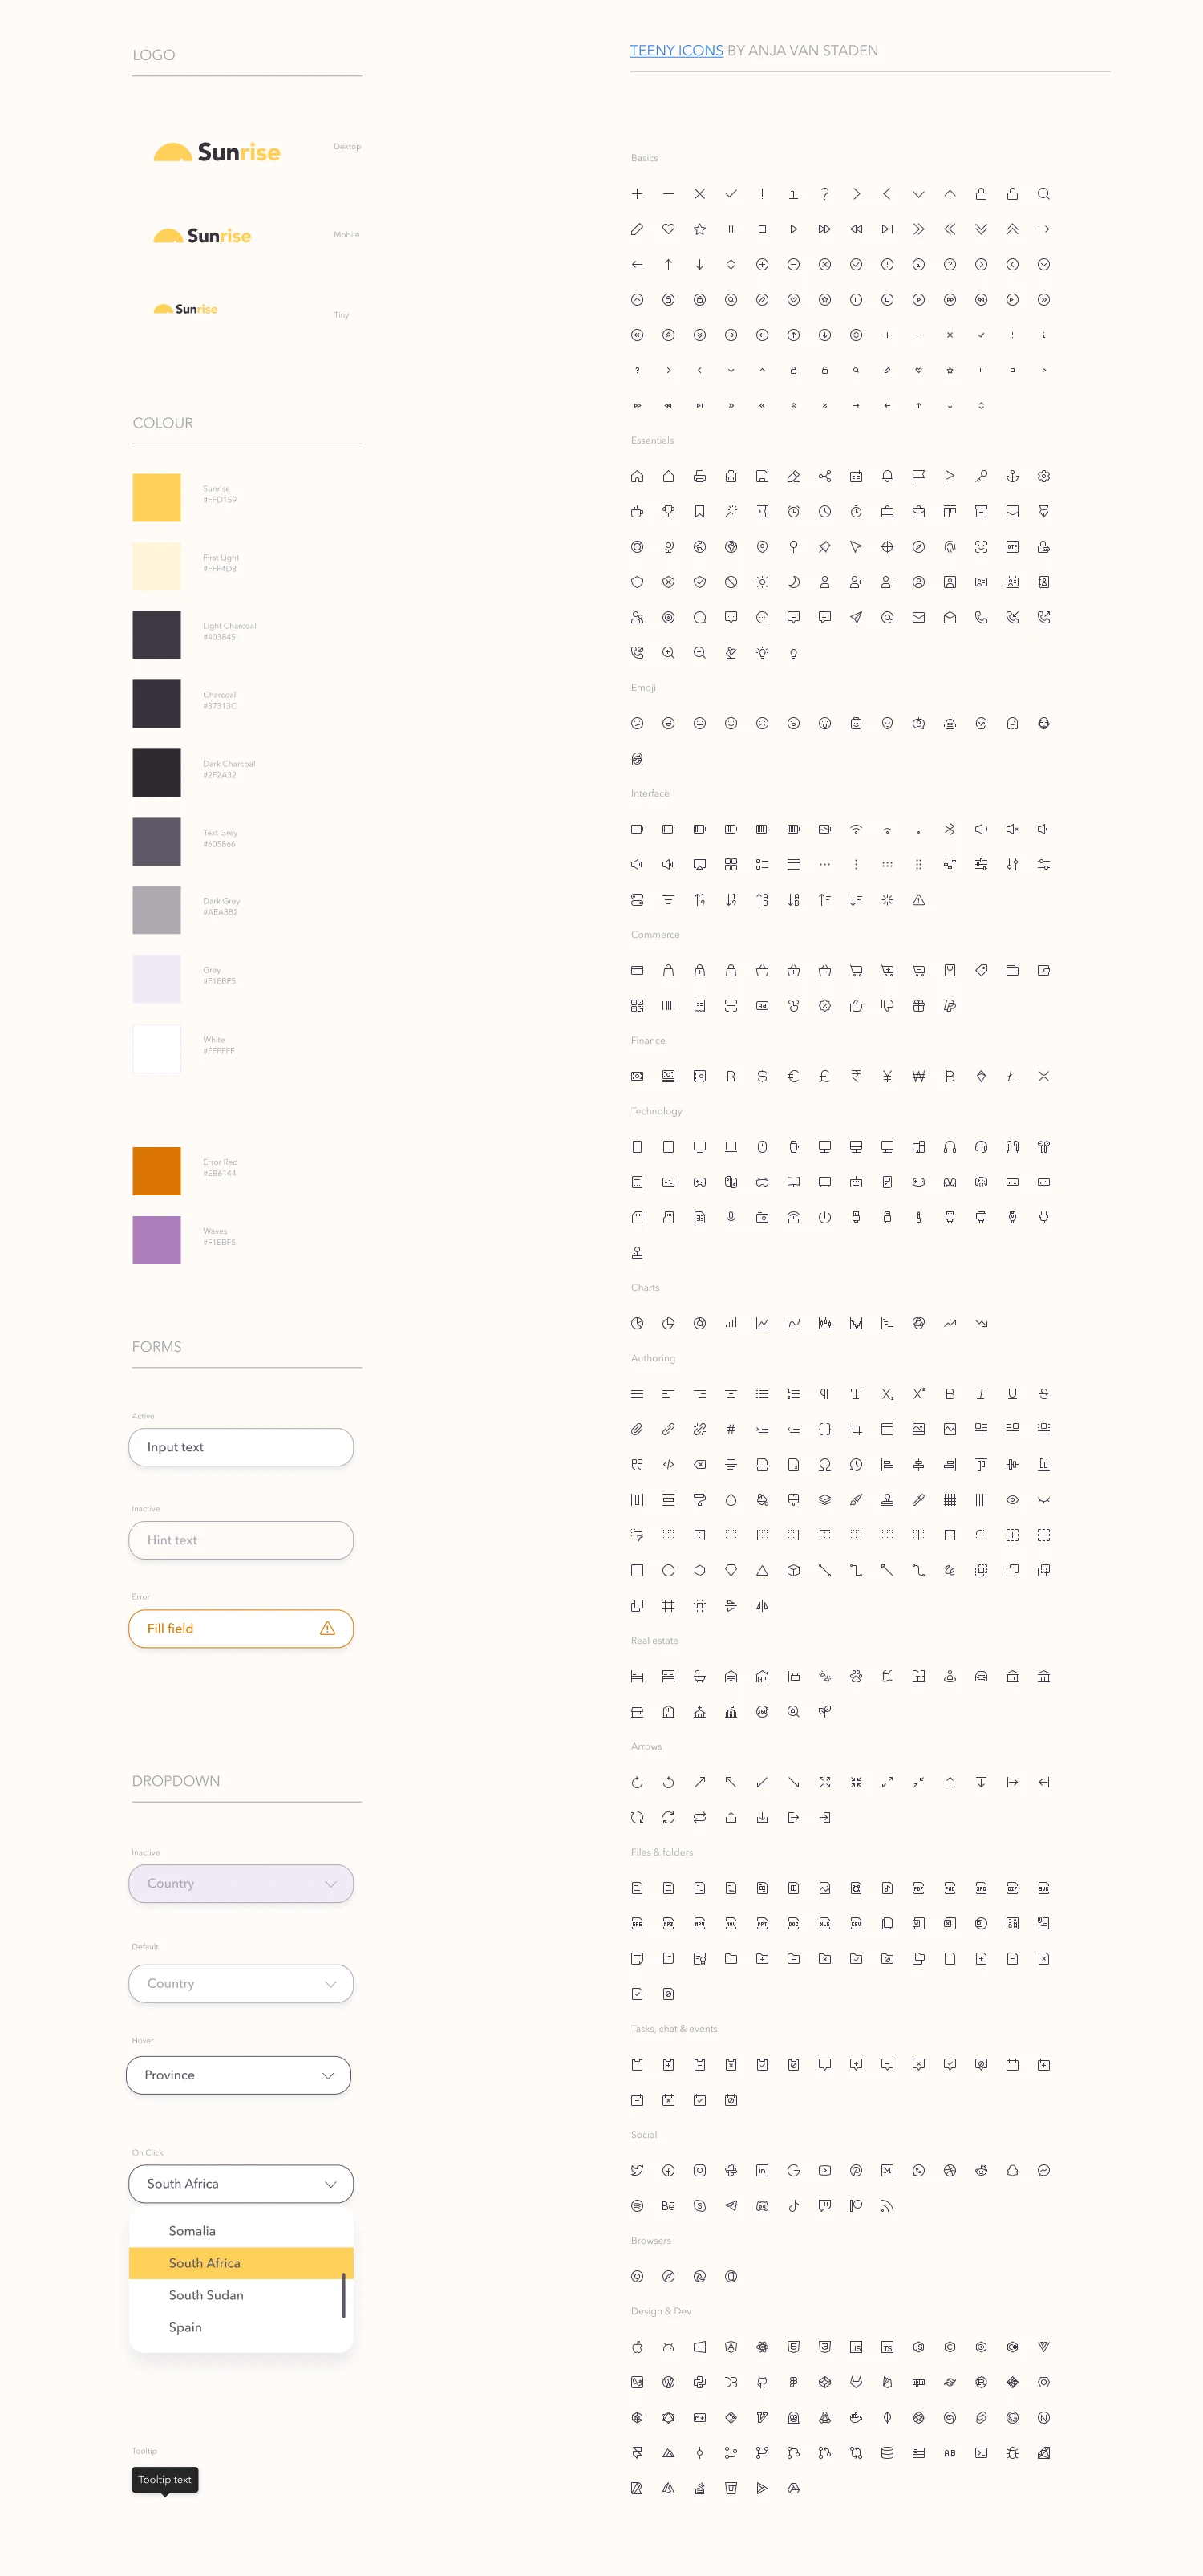 Sunrise Design System for Figma - ☀️Sunrise is a Design System oriented for Web (Desktop & Mobile) usage I created. I kept things fairly simple as I believe it should have space to organically grow your component library specifically for your application. I decided to make ☀️Sunrise, open source and available to anyone who would like to use it or be inspired by it.